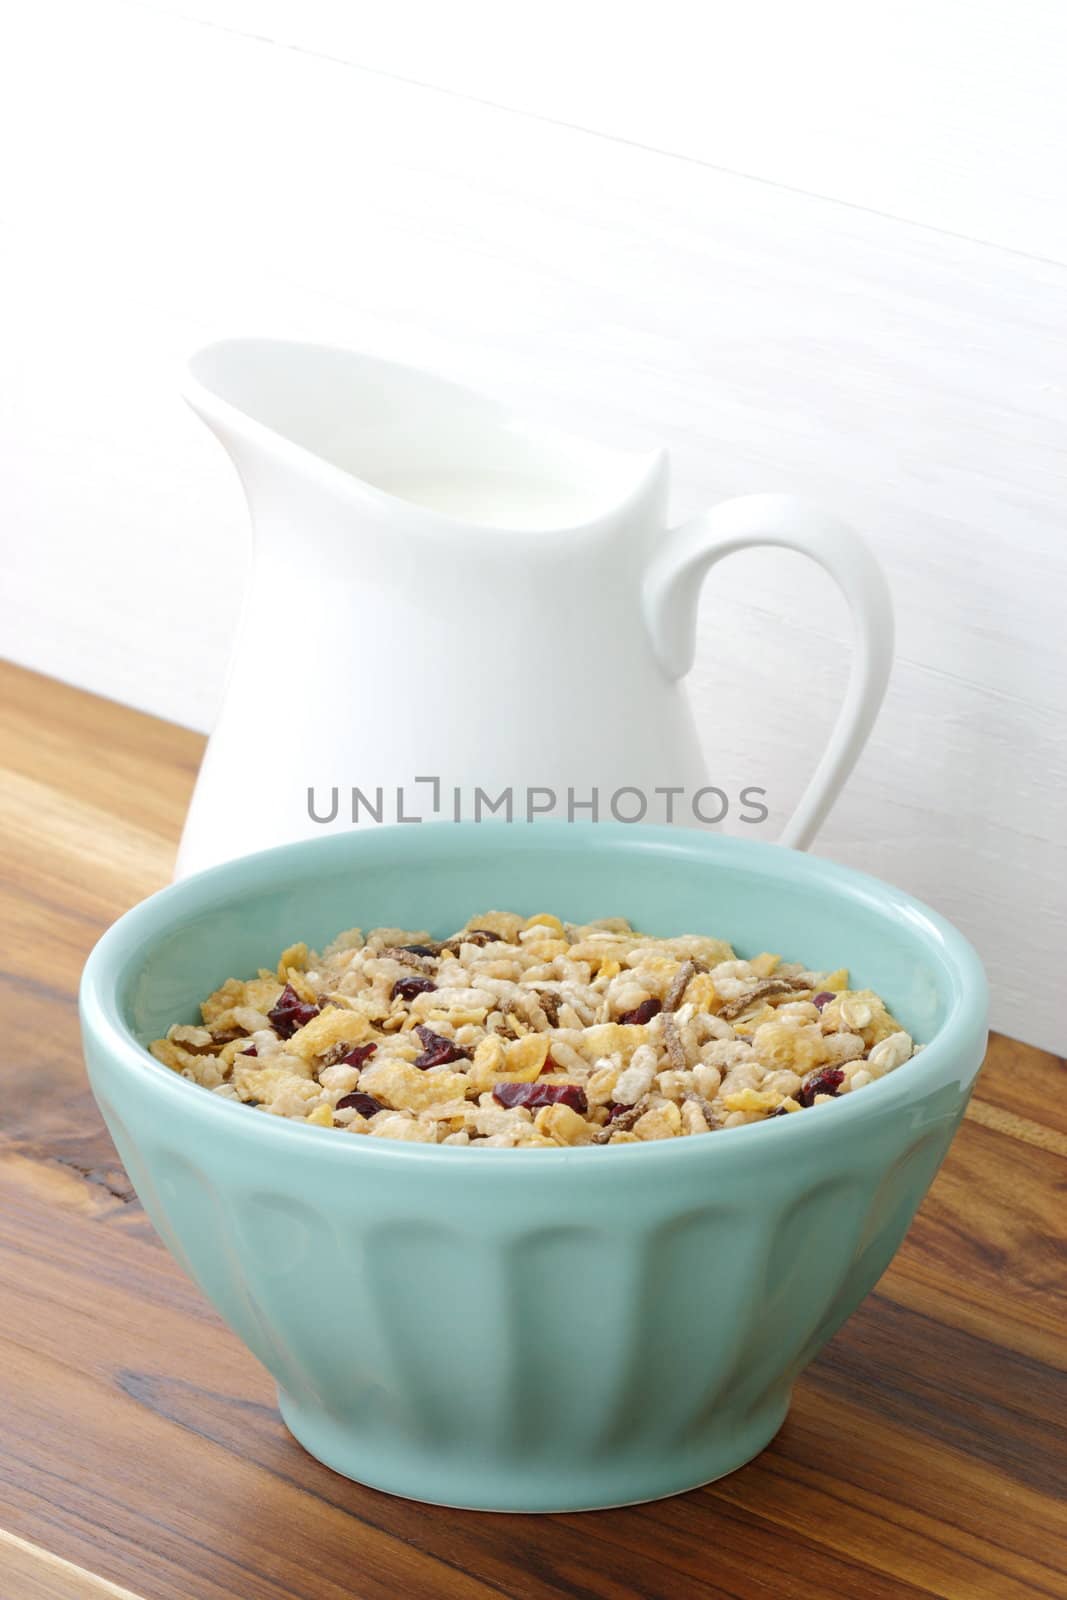 Delicious and nutritious lightly toasted breakfast muesli or granola cereal.